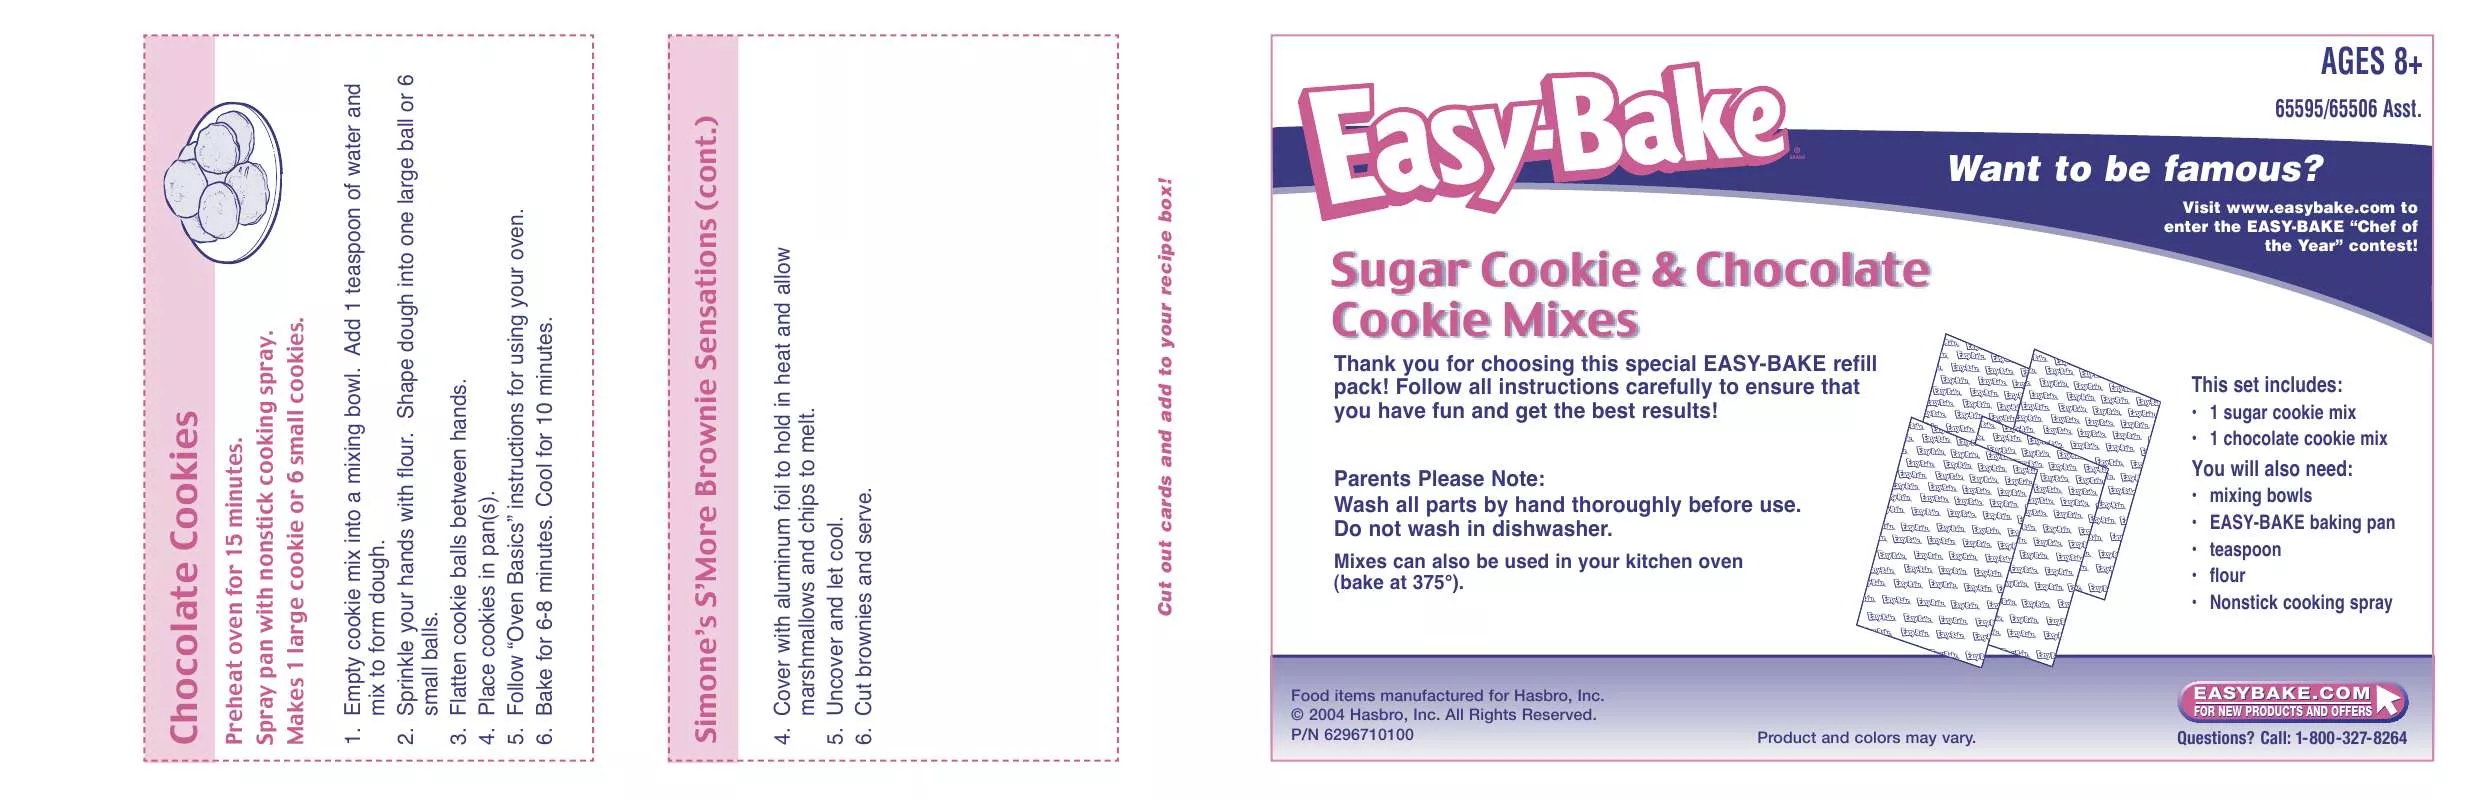 Mode d'emploi HASBRO EASY BAKE SUGAR COOKIE AND CHOCOLATE COOKIE MIXES 2004